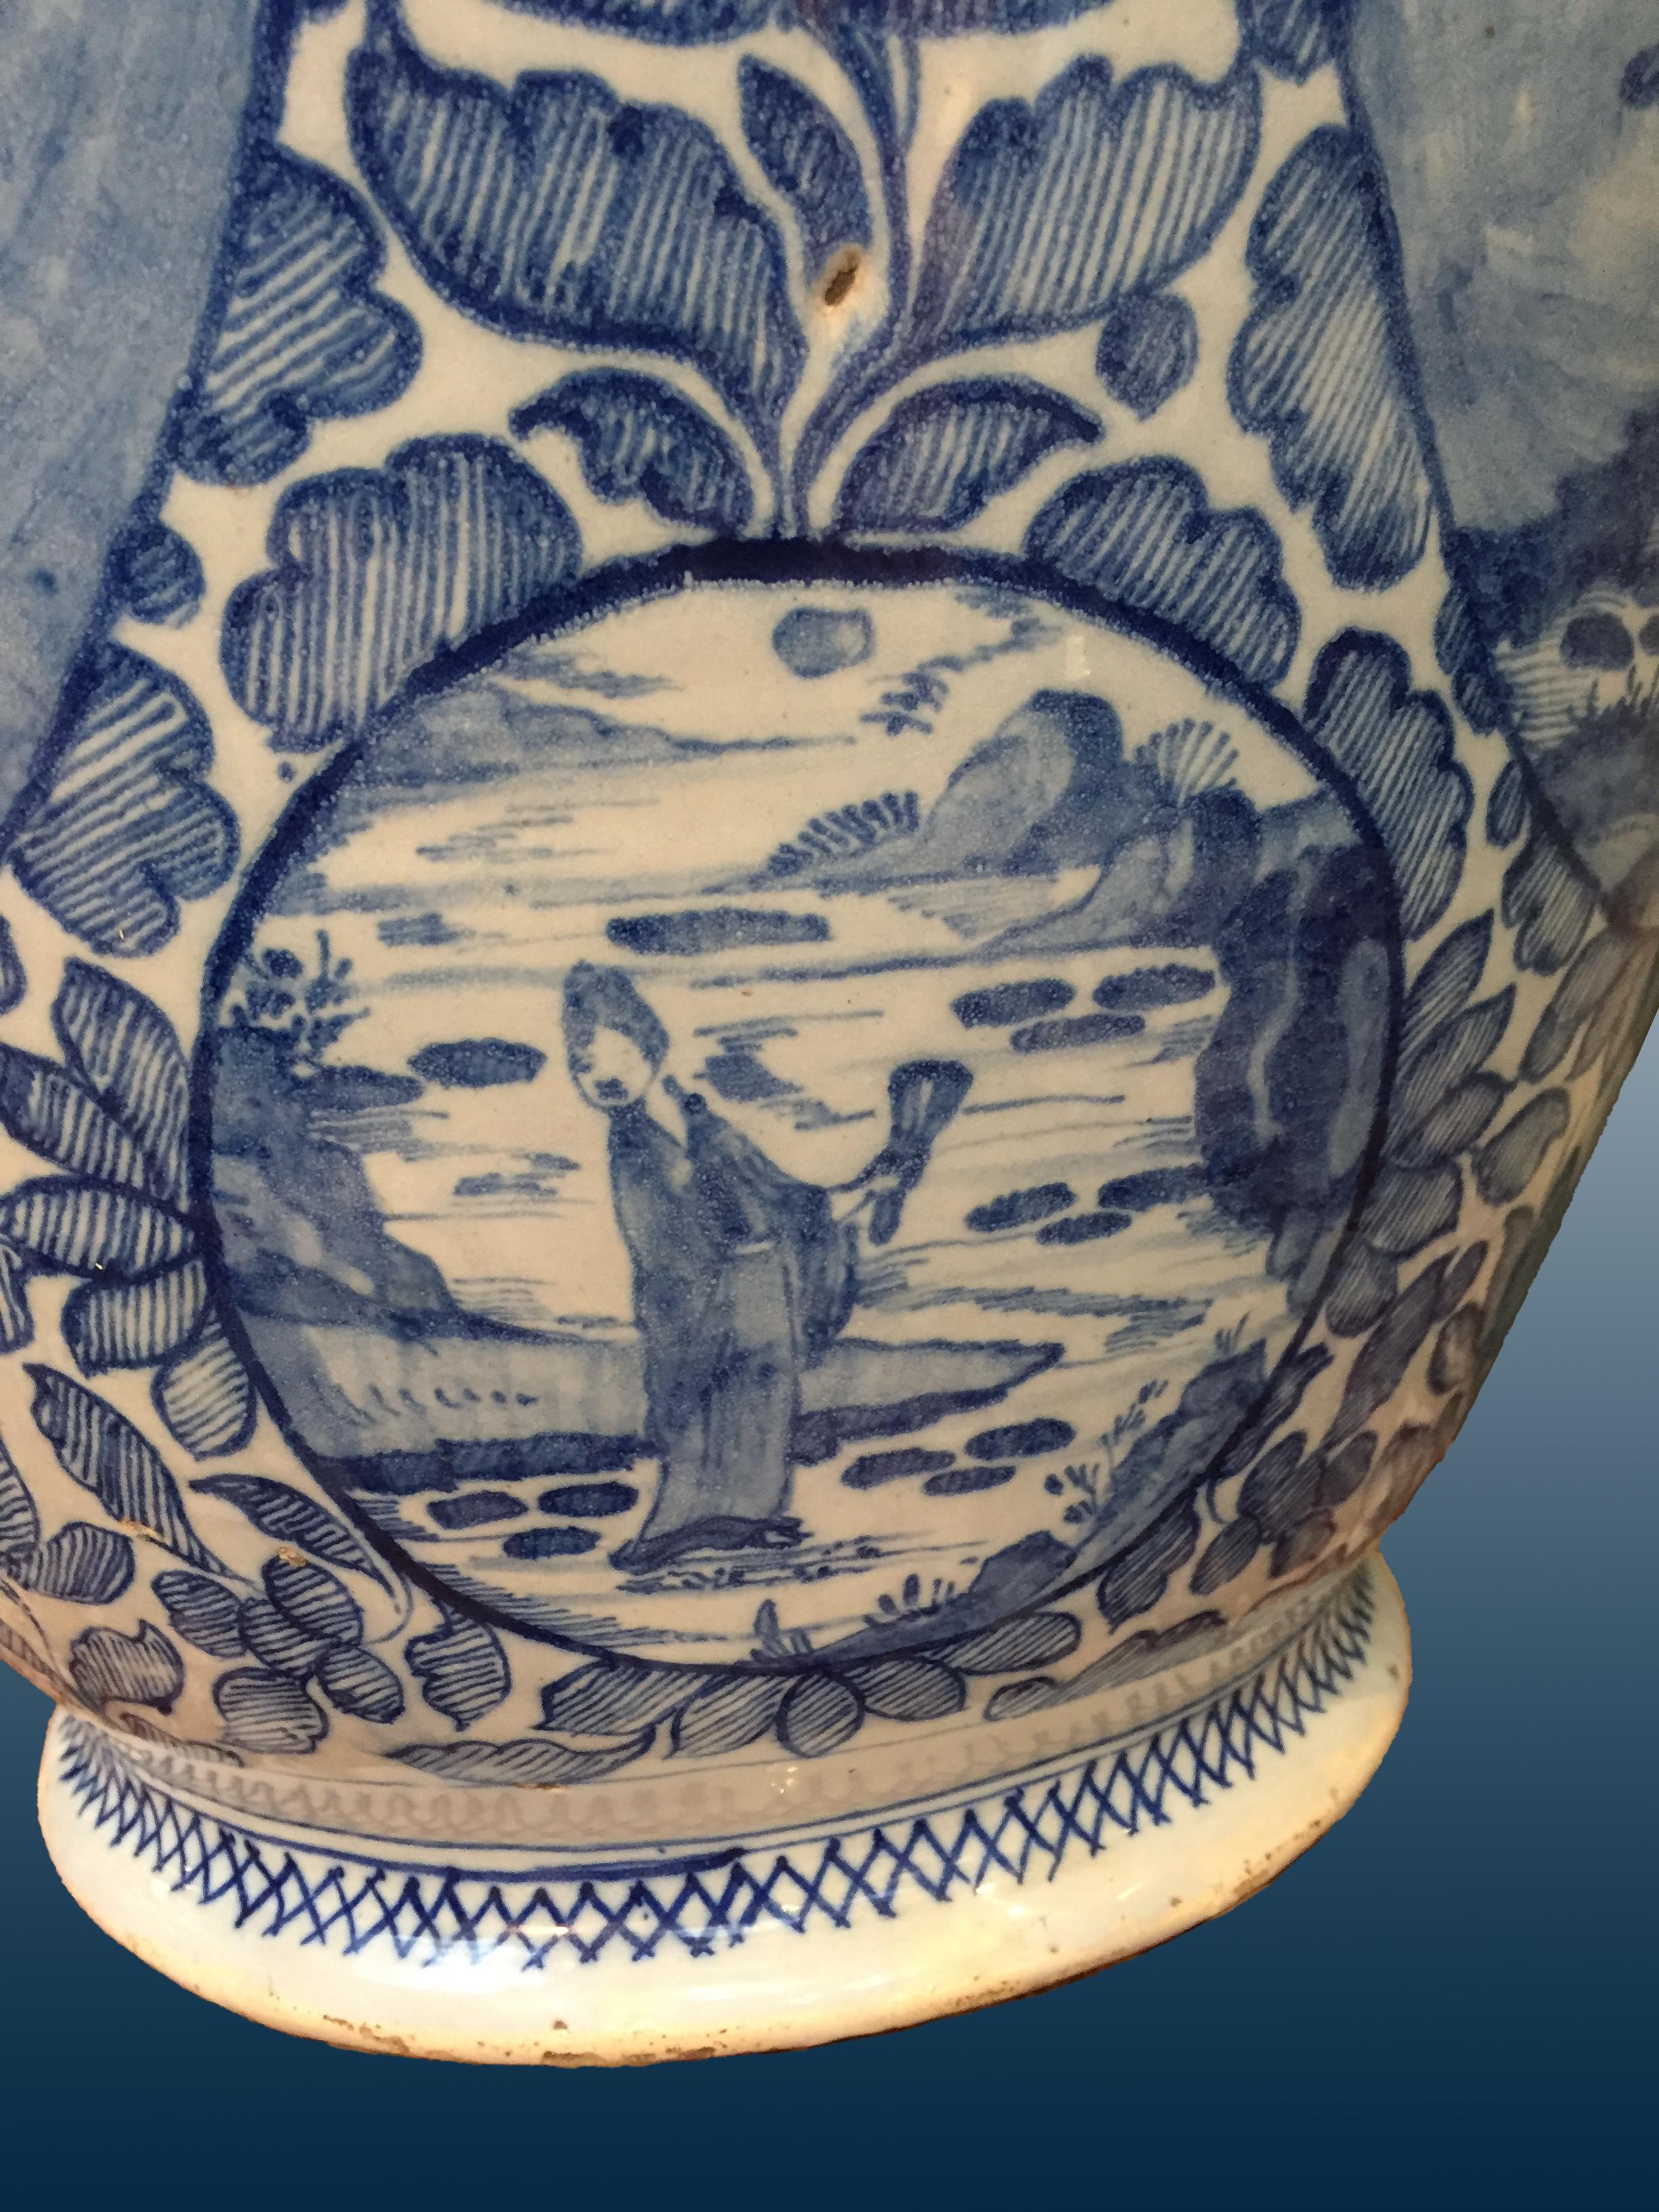 Ceramic Very Large Blue and White Dutch Delft Vase in Chinoiserie, Early 18th Century For Sale